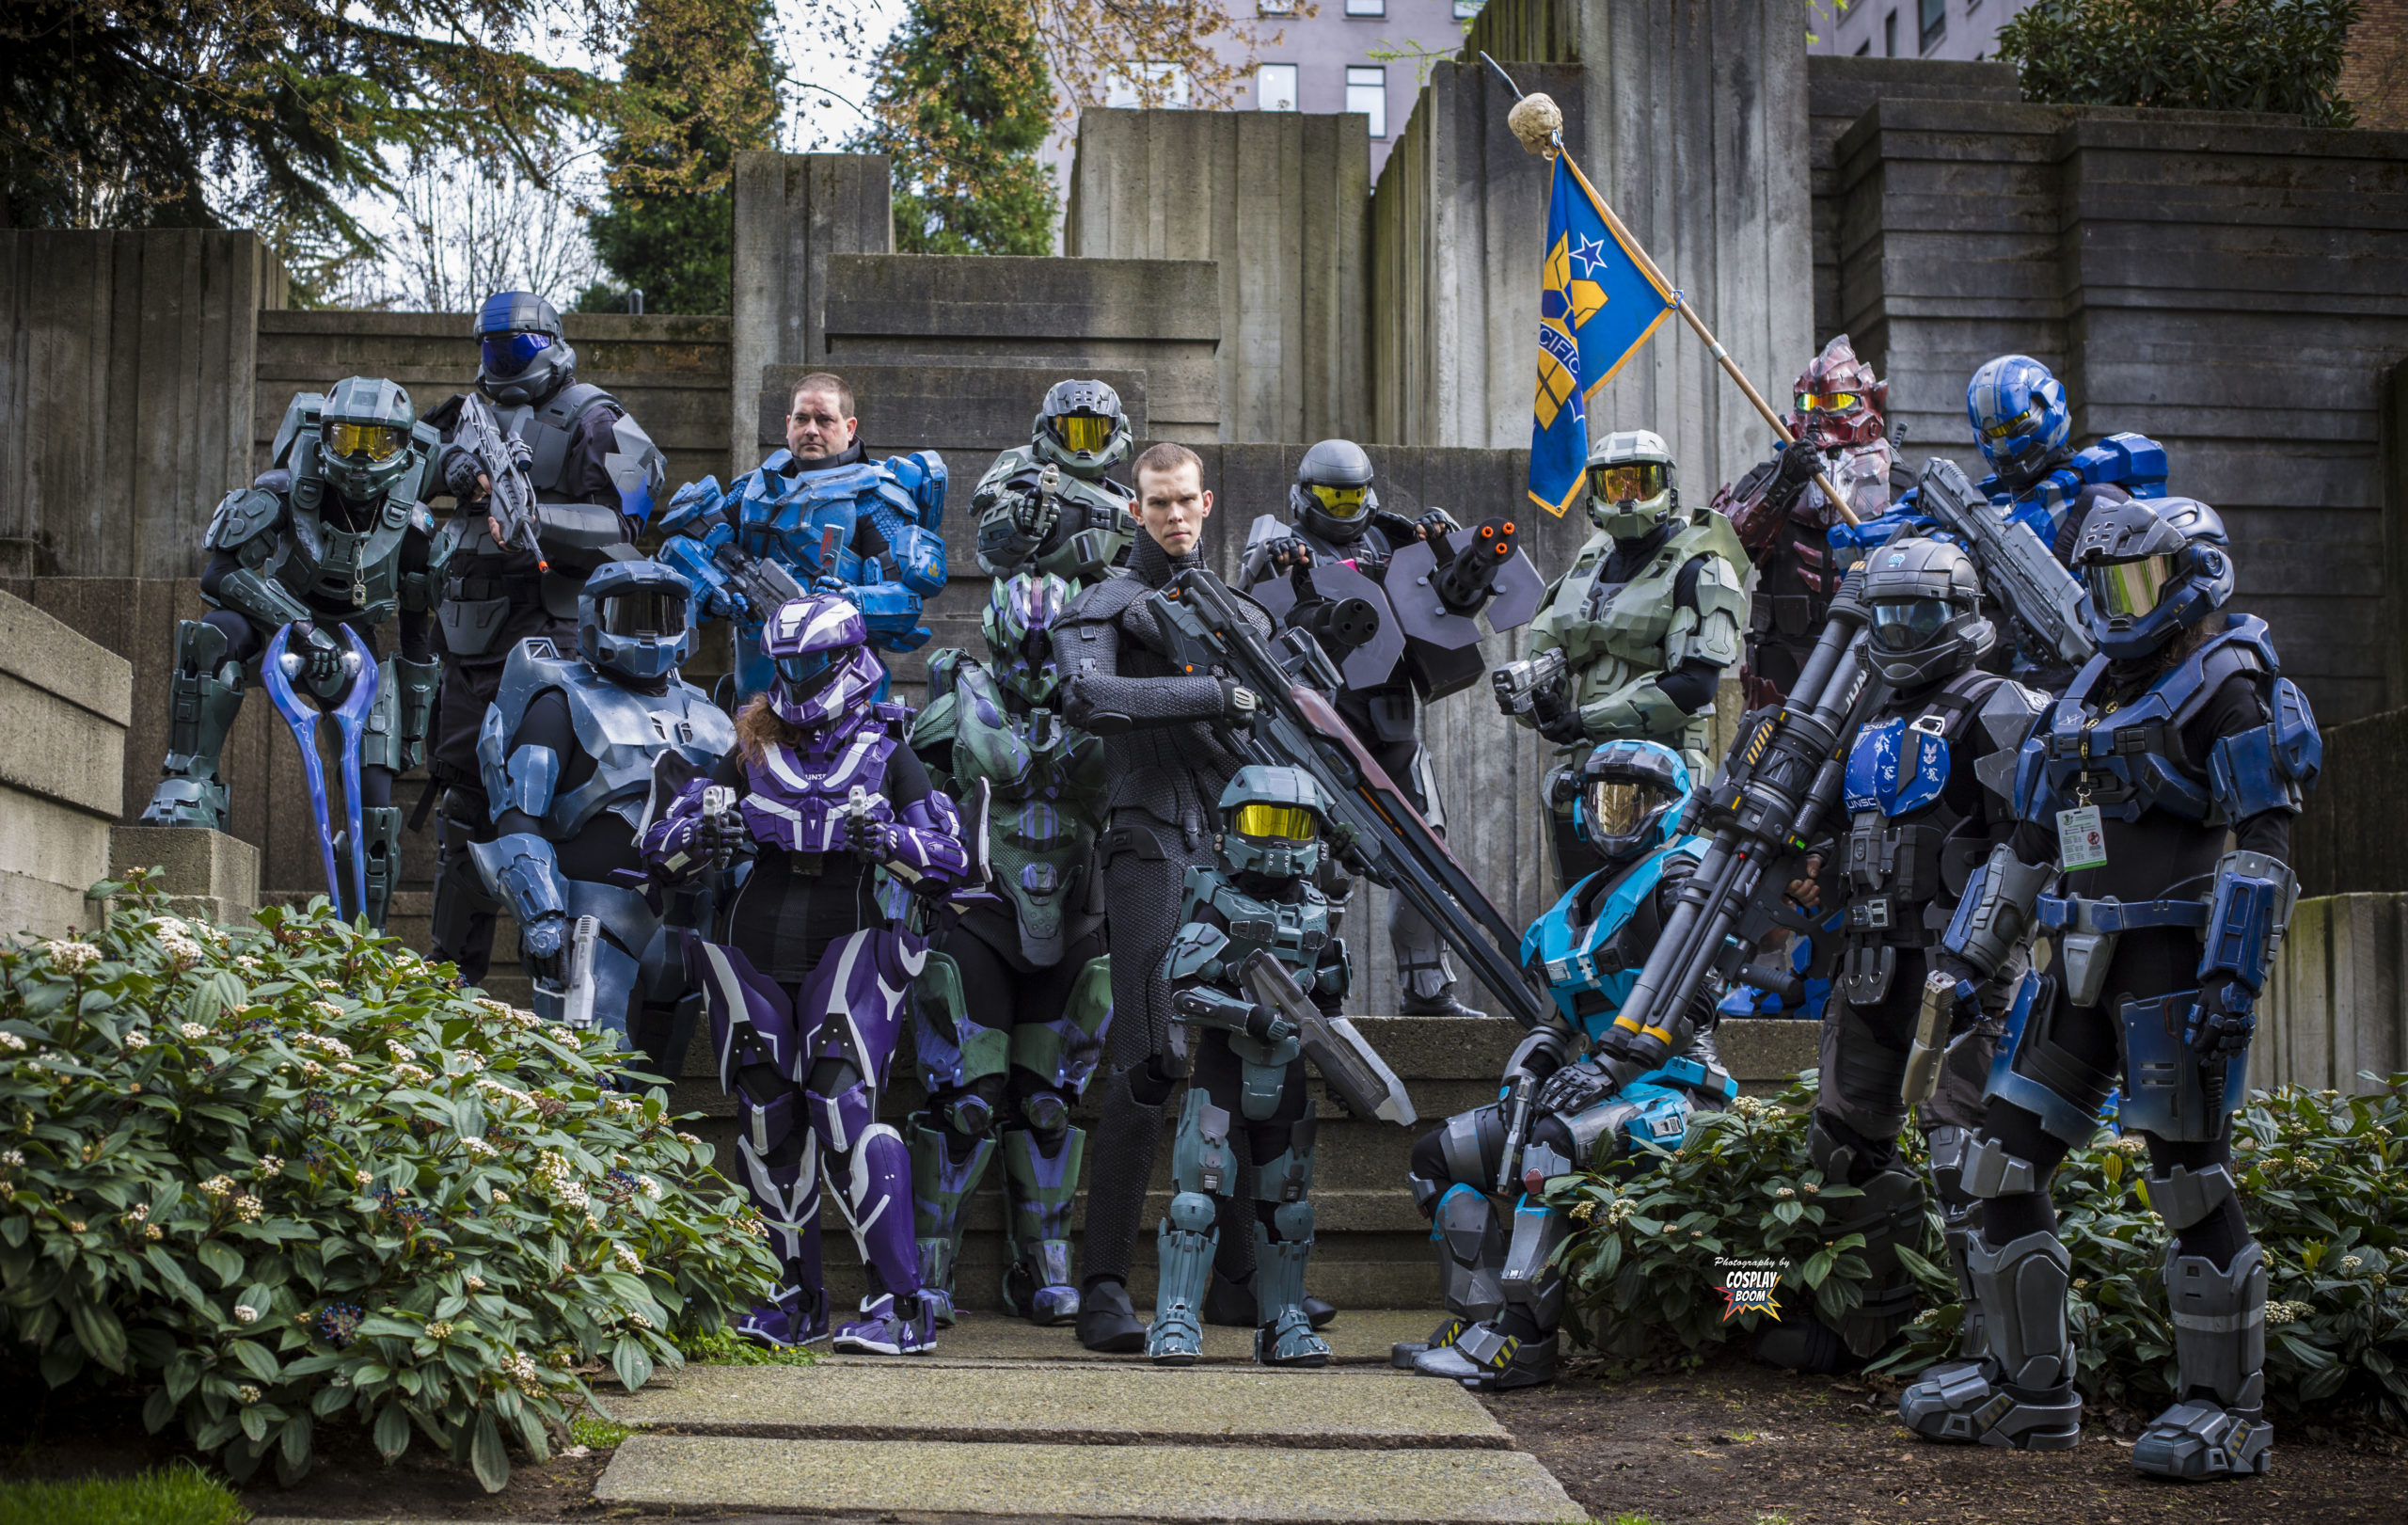 Iron Man’s Best Friend Ultron, Chappie Cosplay and A Whole Lot of Halo